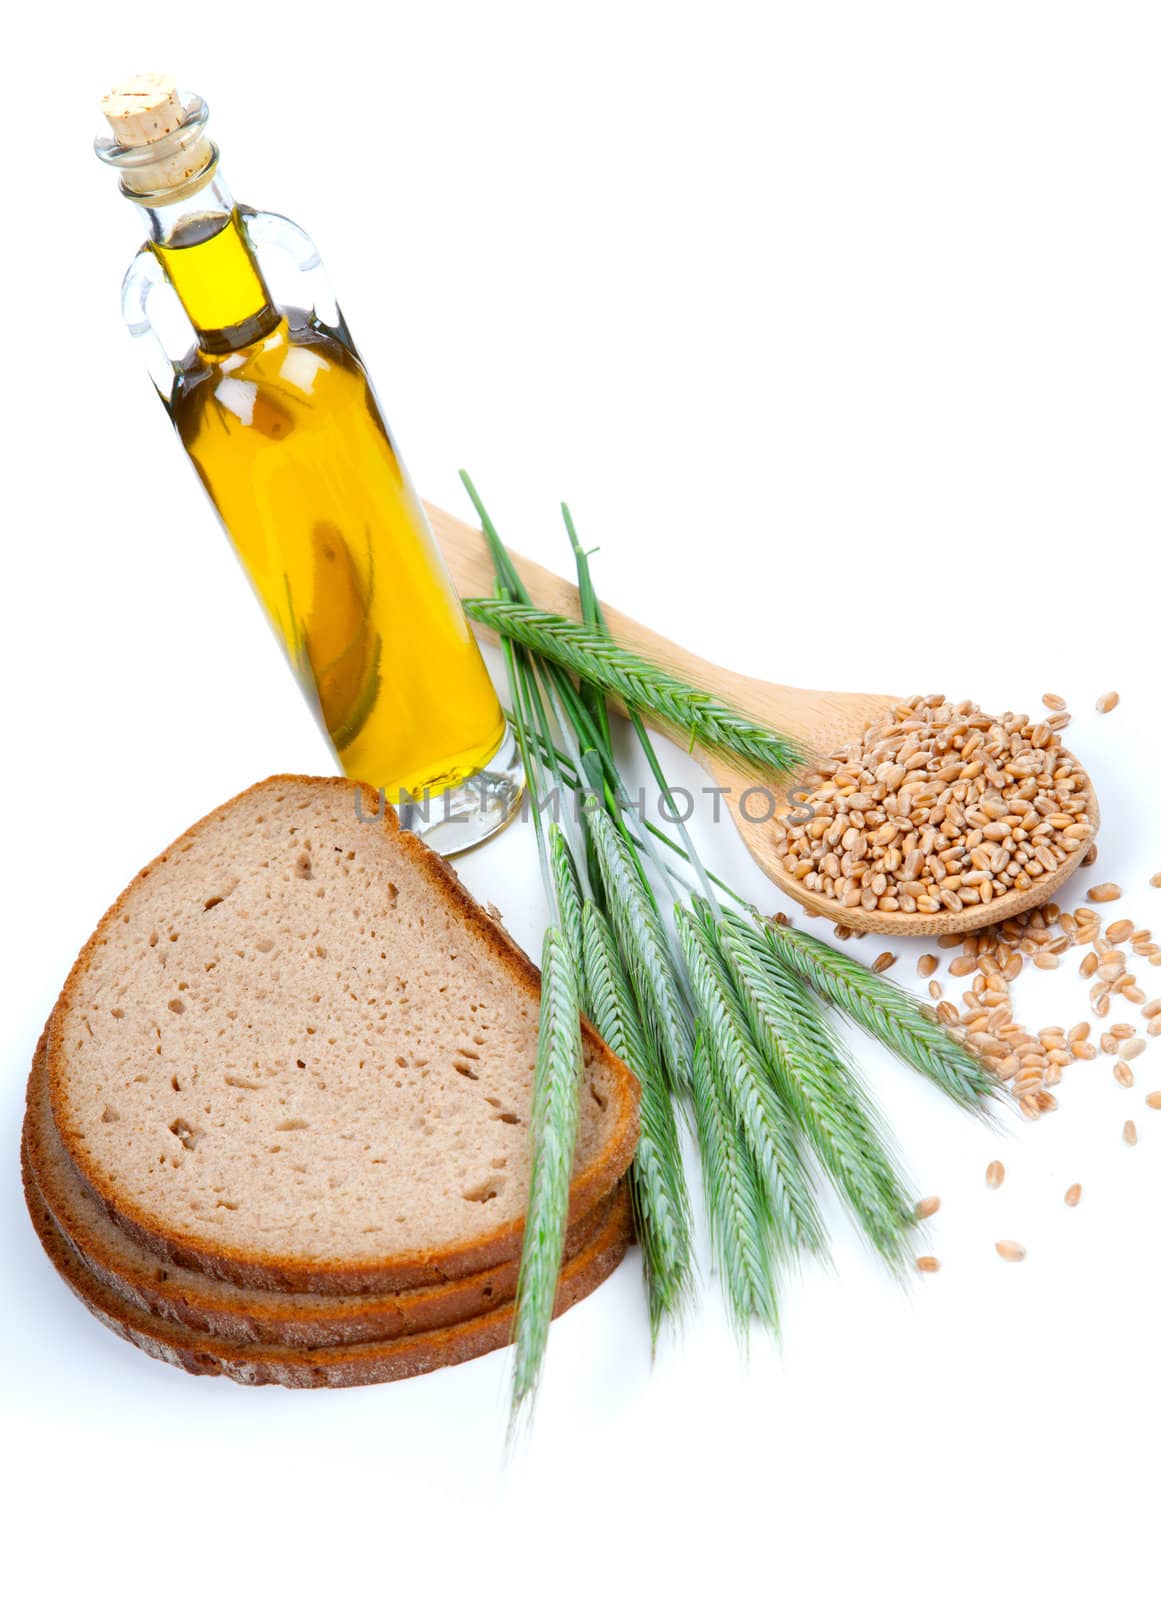 tasty baked bread with ears and wheat grain, isolated on a white background